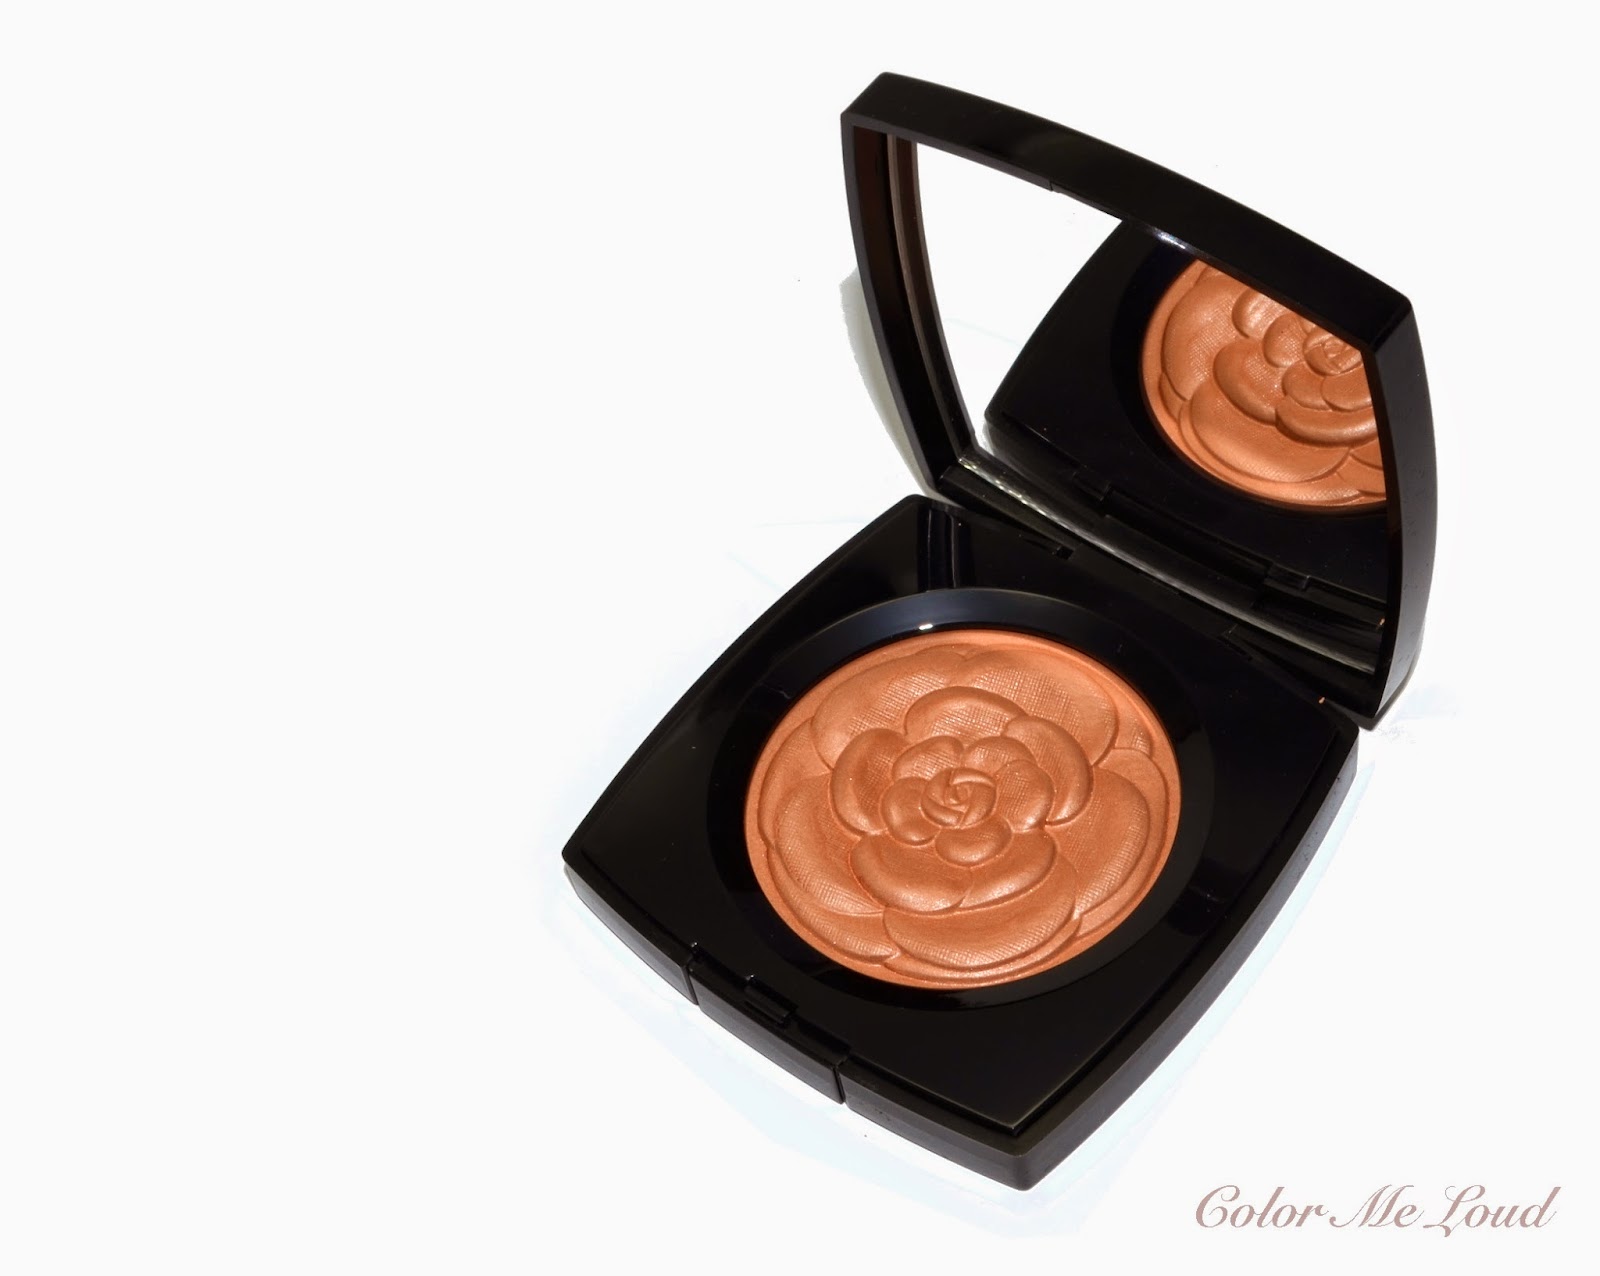 Chanel Lumiere D'Ete Illuminating Bronzer and Rouge Coco Shine #507  Insoumise, Review, Swatch, Comparison & FOTD